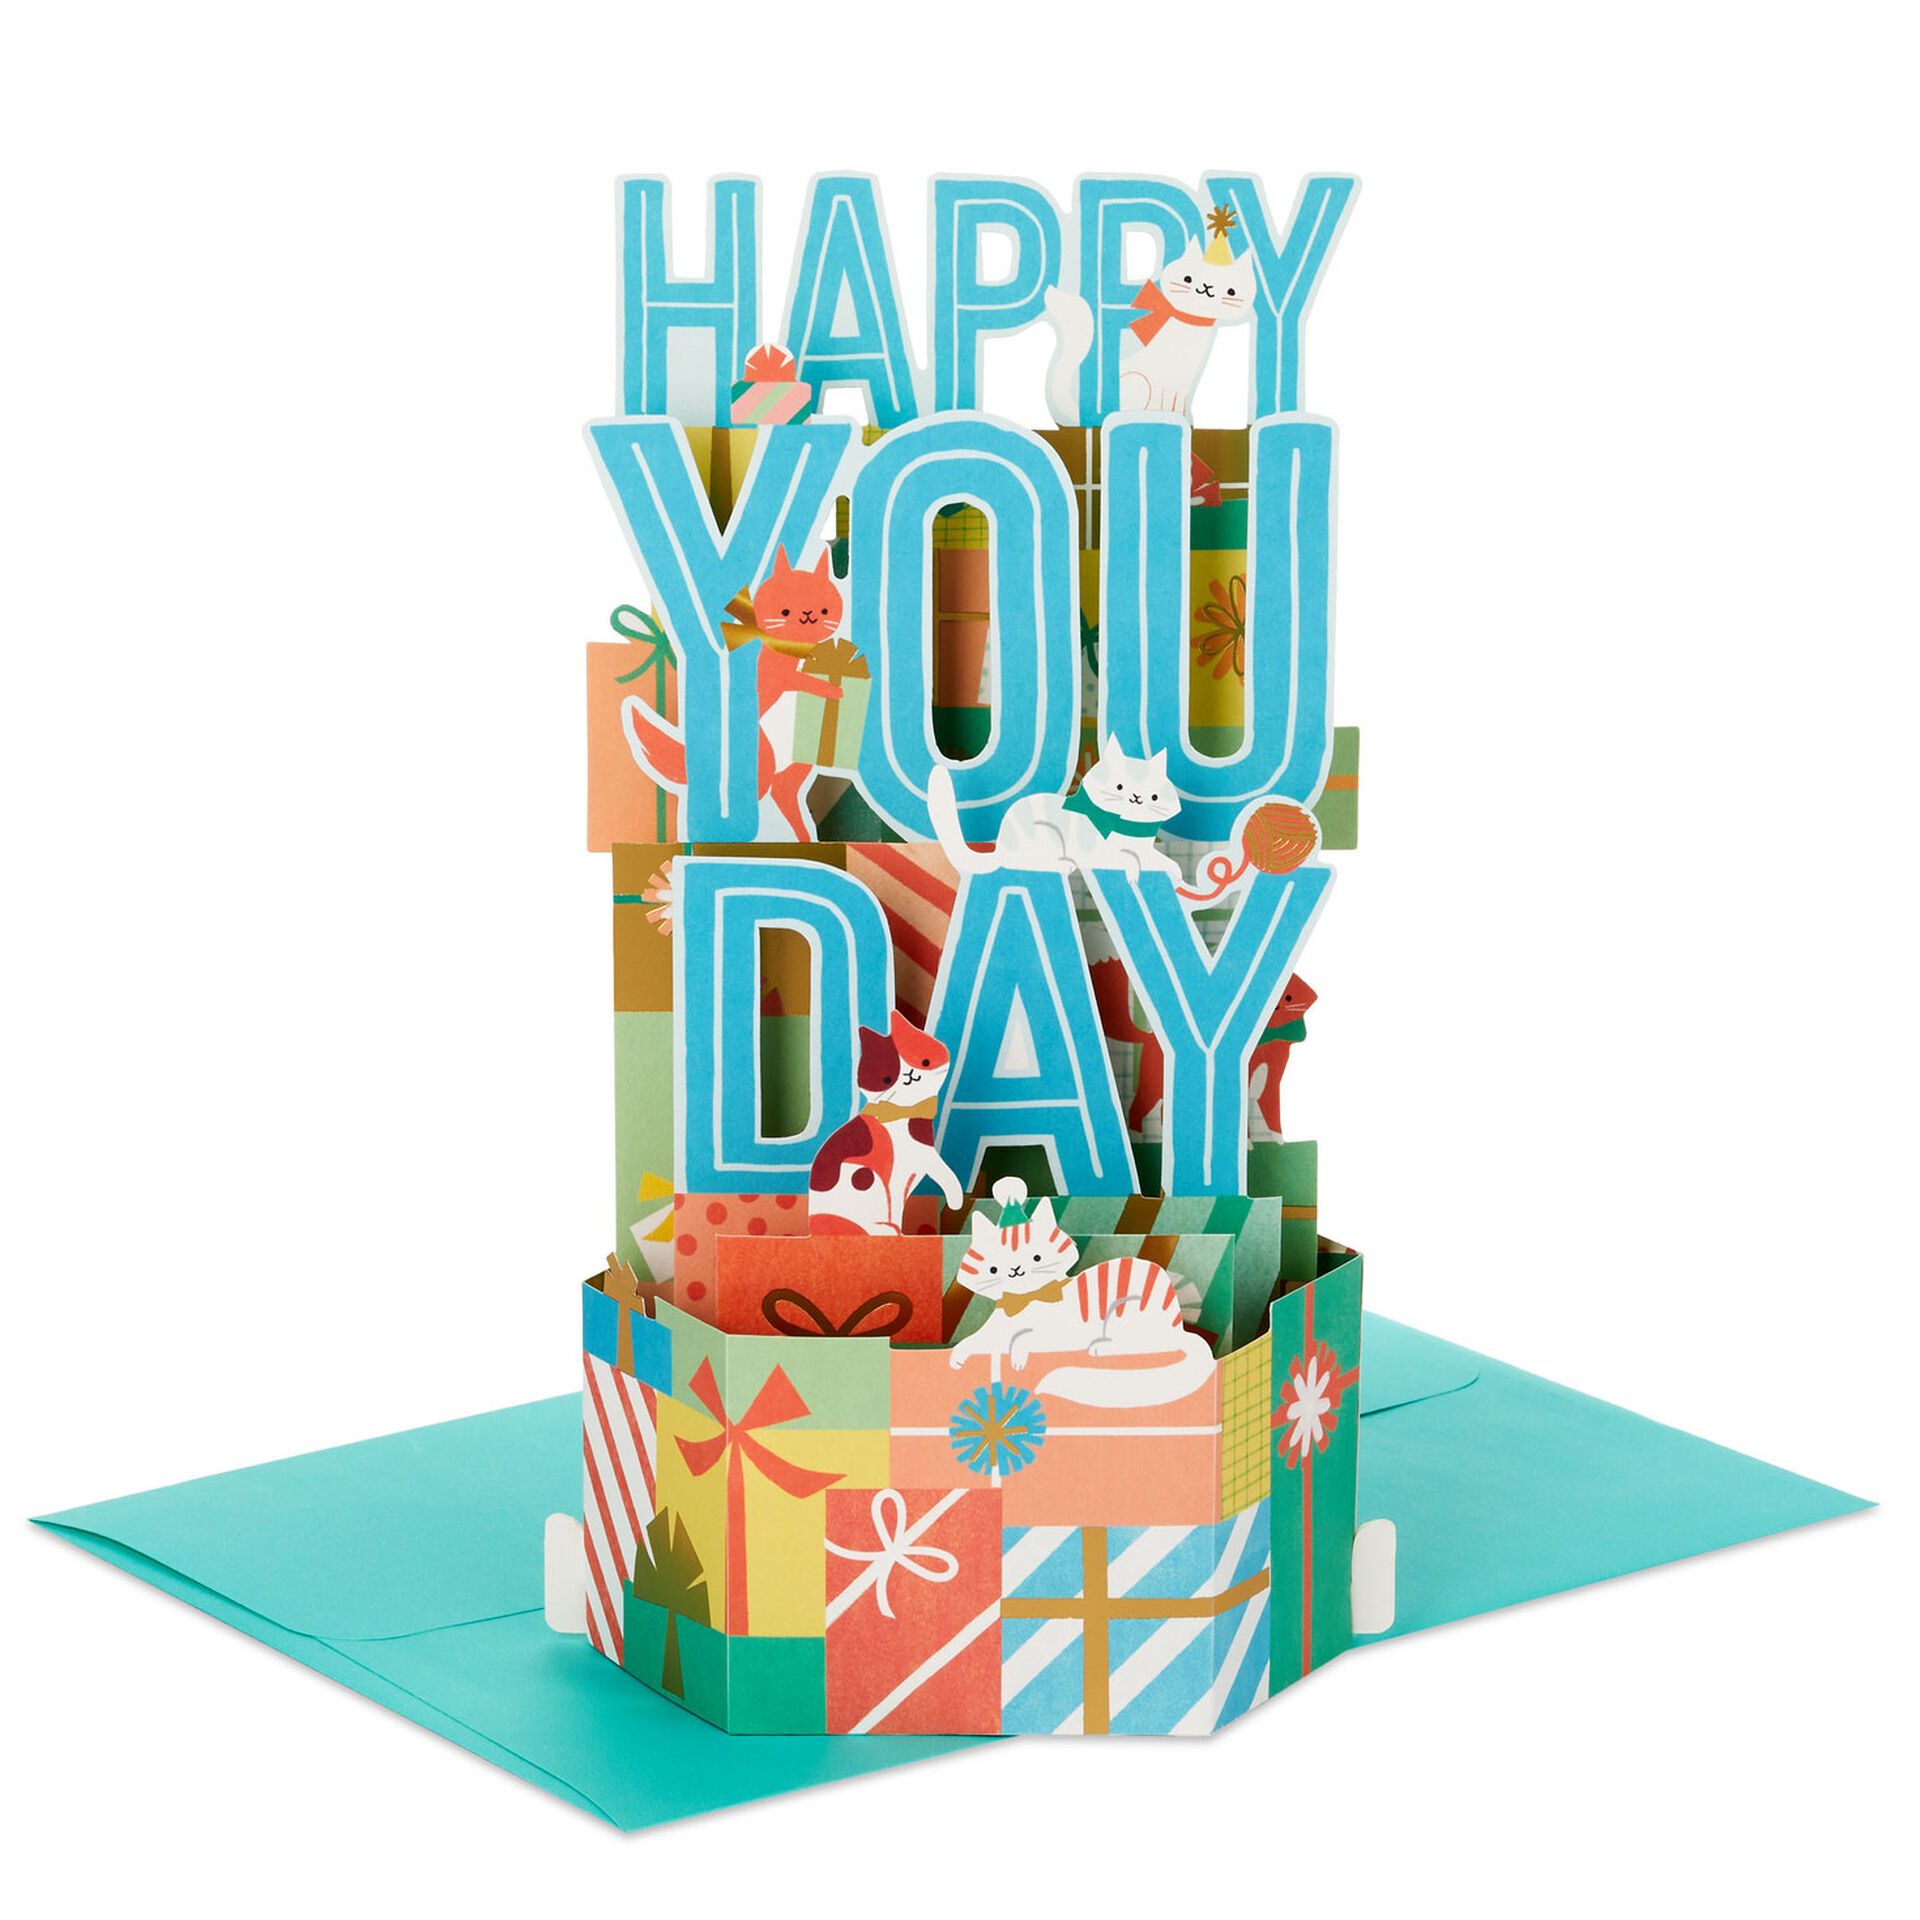 Kittens-and-Presents-3D-PopUp-Birthday-Card-for-Her_799WDR1220_01